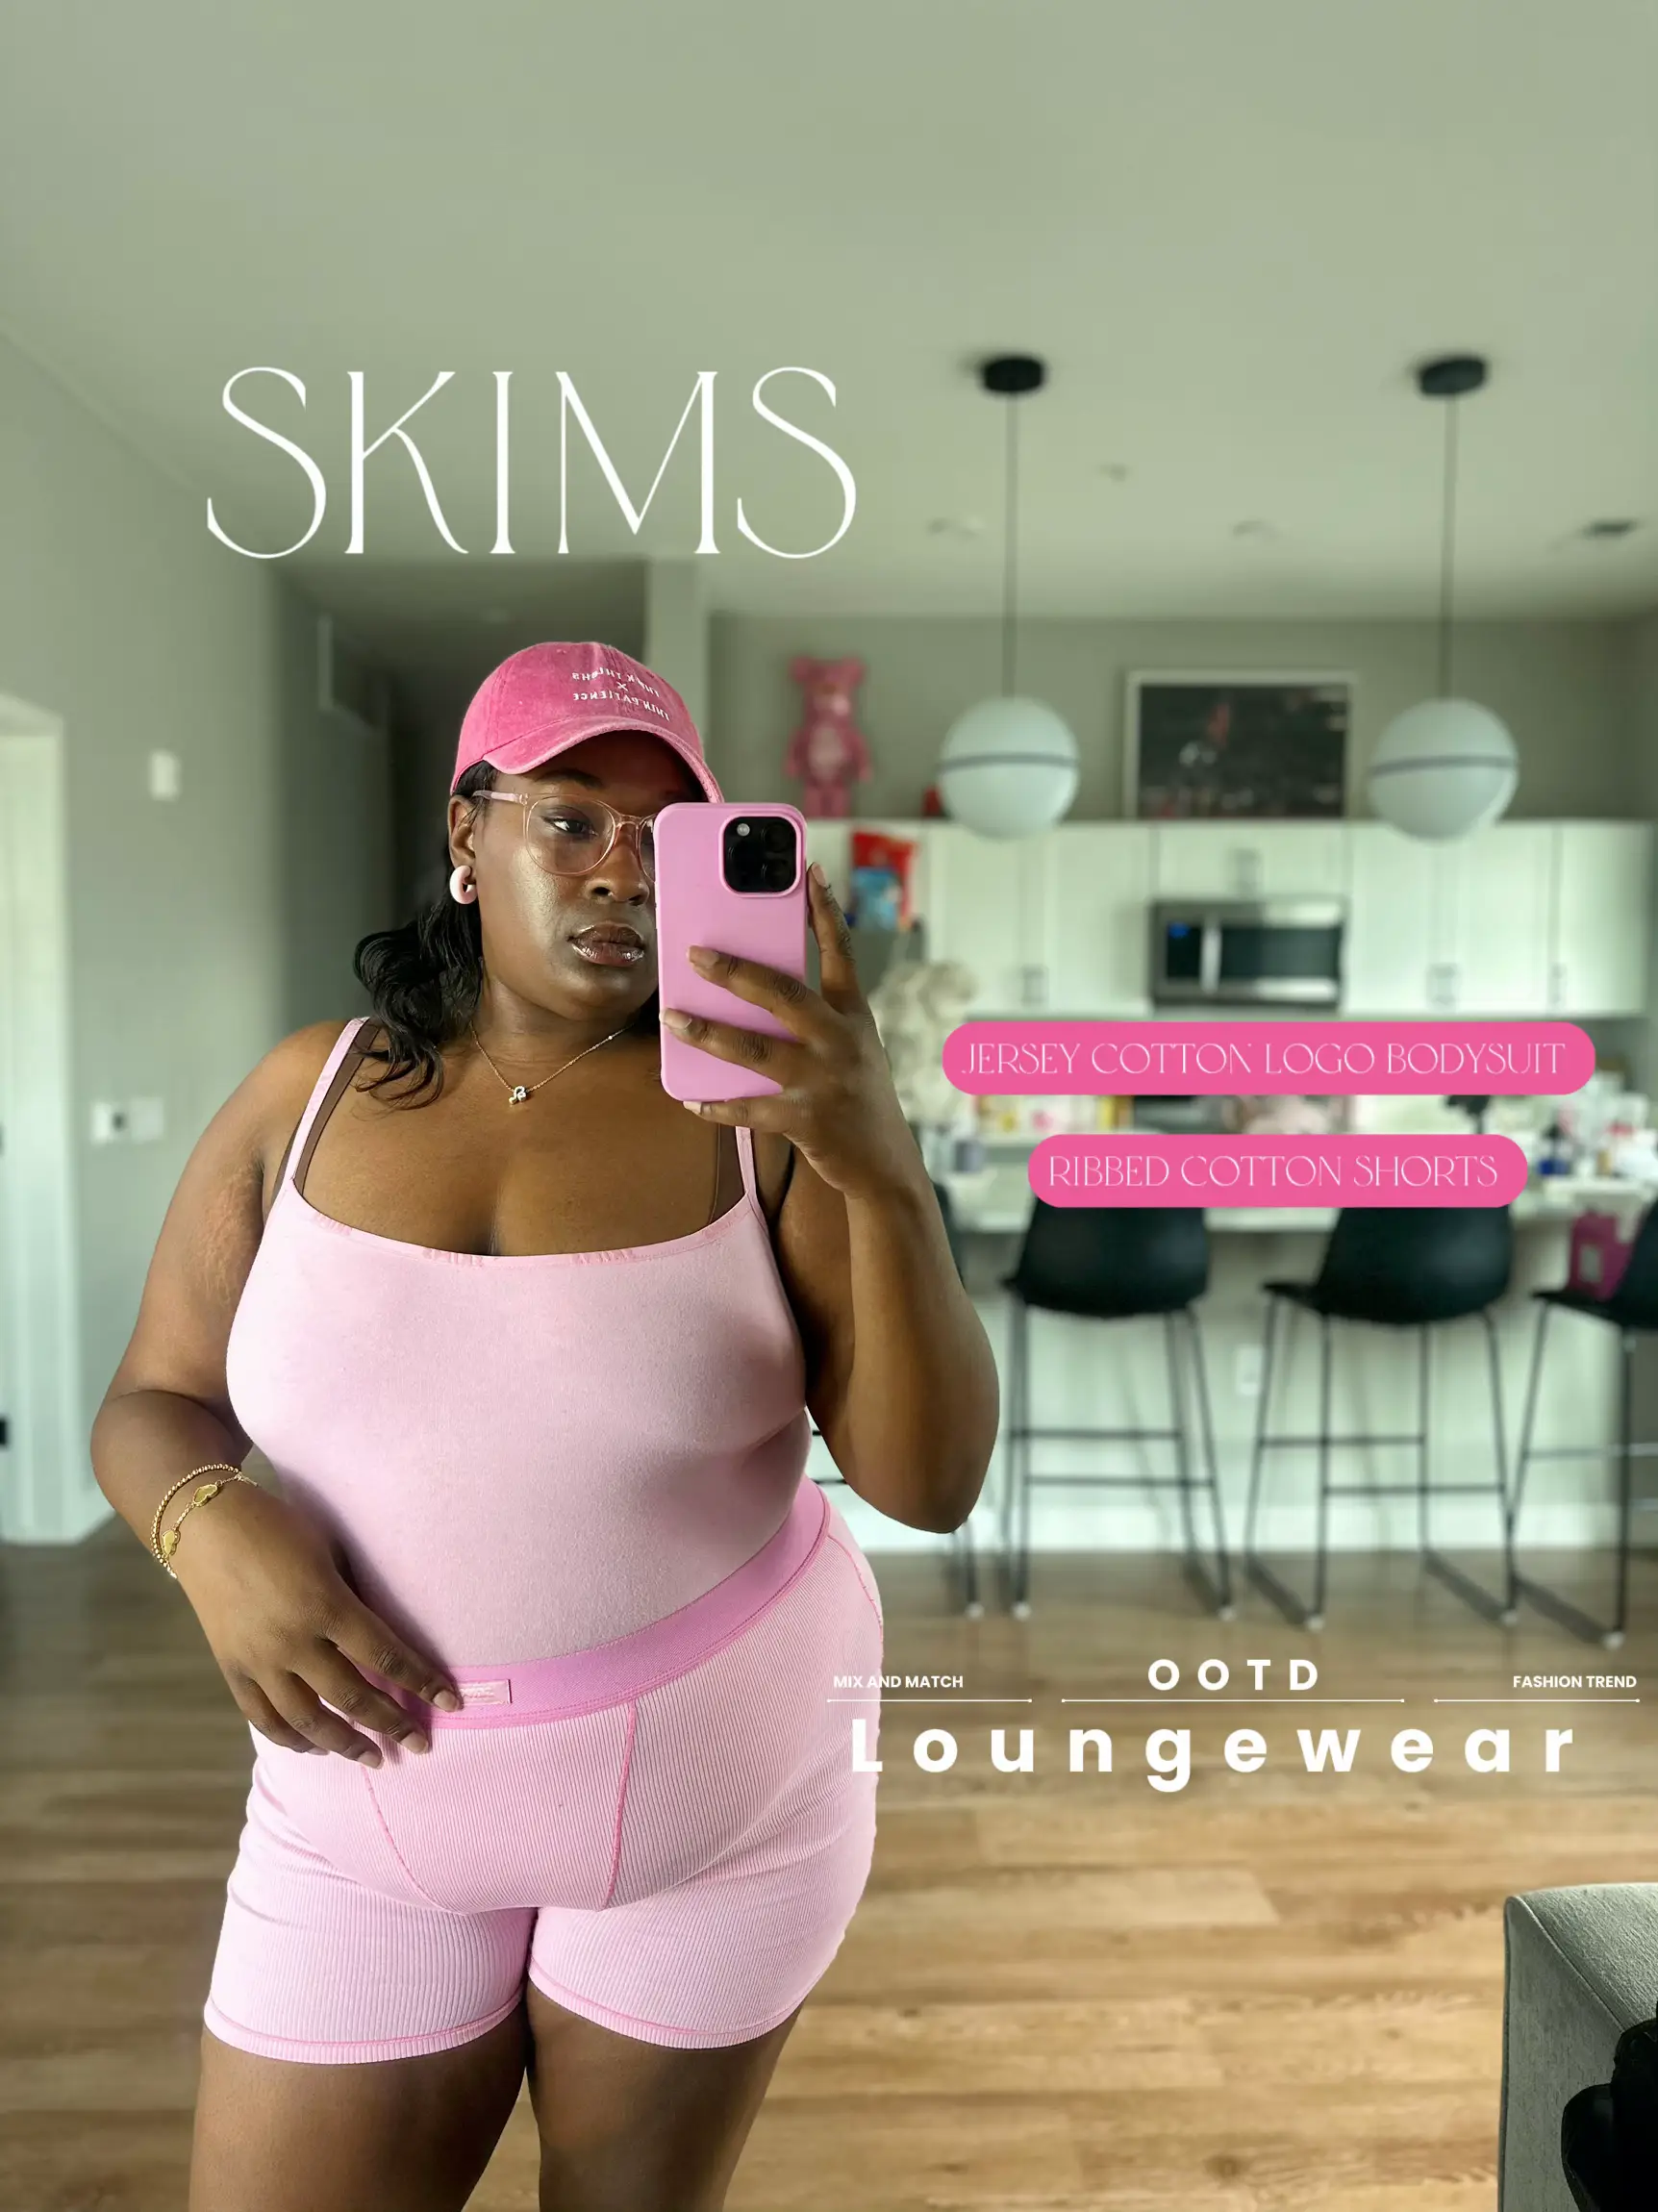 Skims loungewear, Gallery posted by Khilahayr